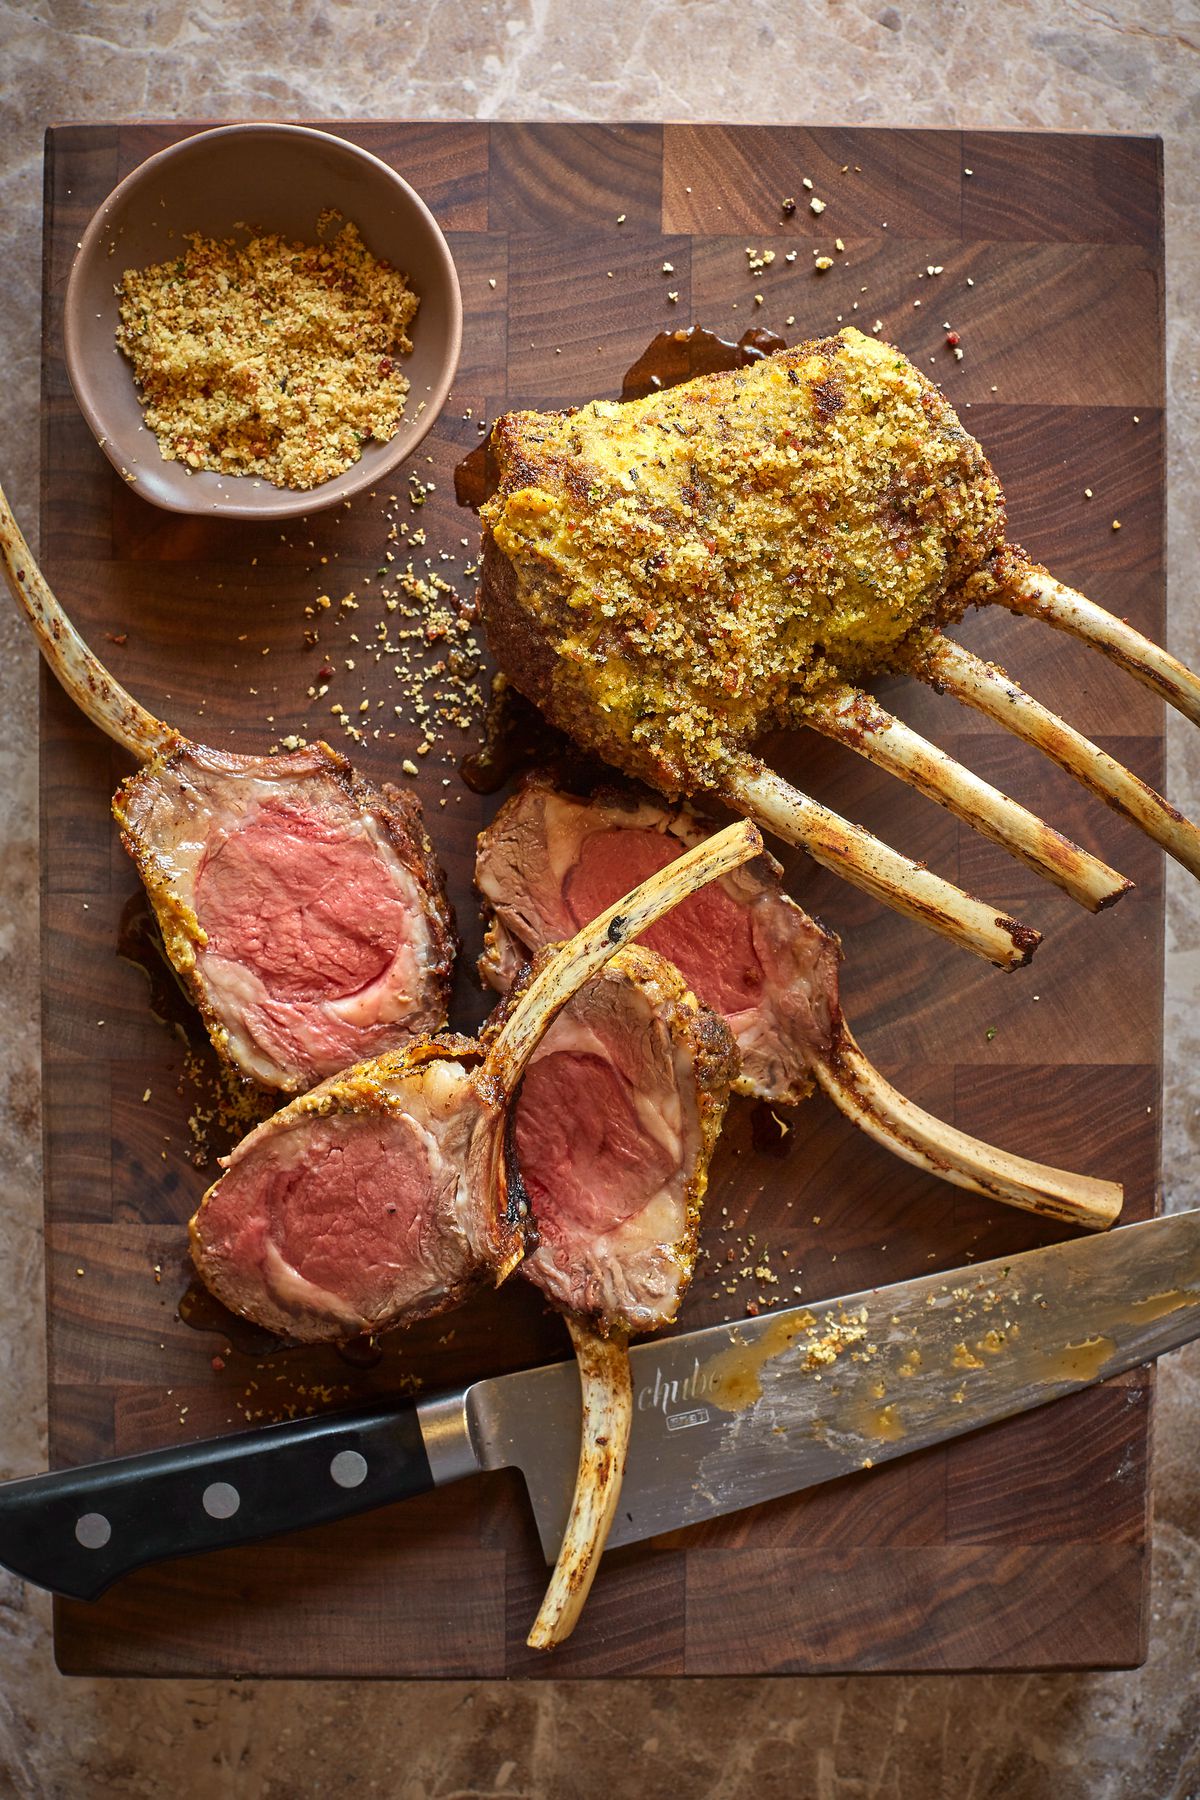 On a wooden cutting board, a rack of lamb crusted with bread crumbs is being cut by a large knife.